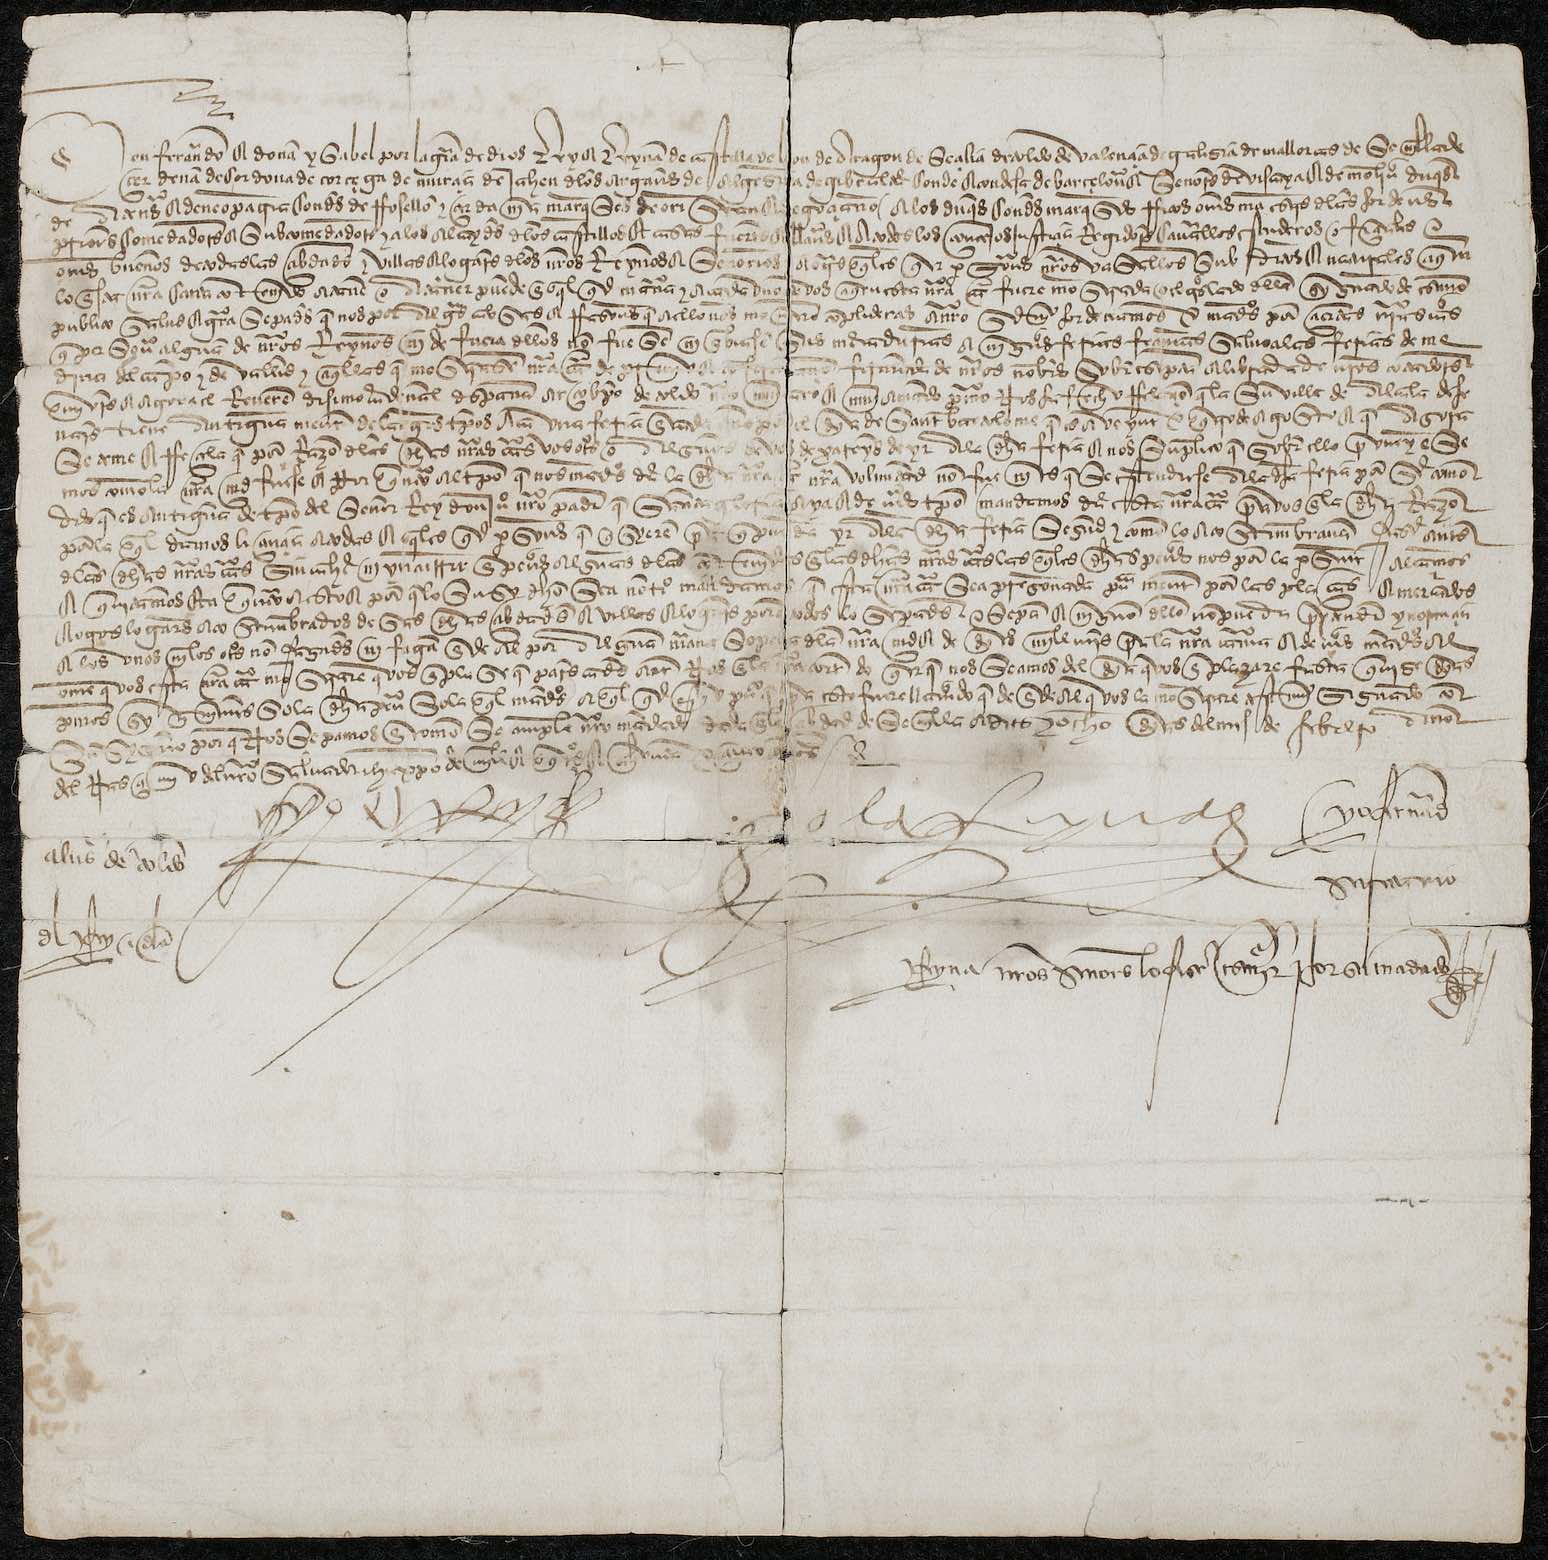 Charter of Isabel I, Queen of Castile and Leon, and Fernando V, King of Castile and Leon.